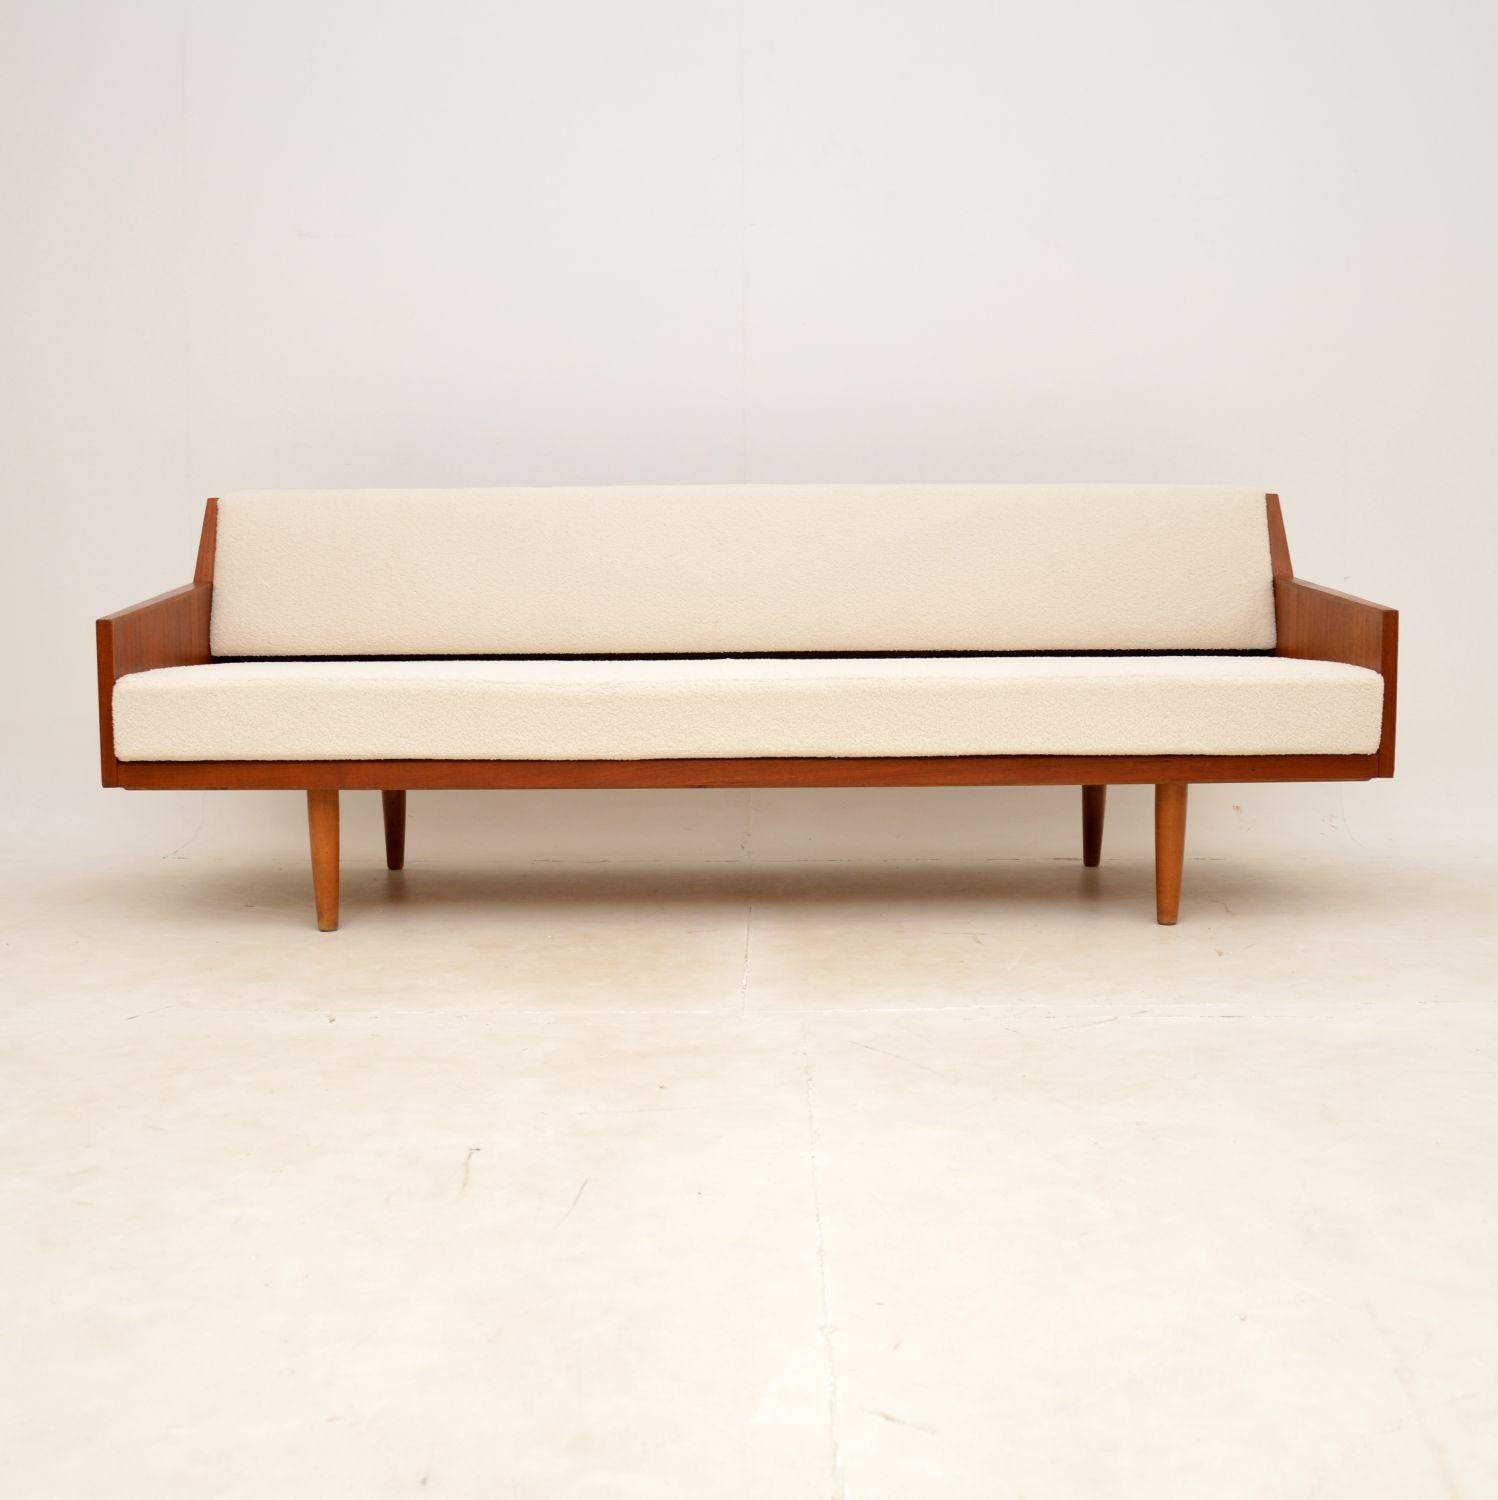 A stunning vintage Danish sofa bed in teak. This was made by Horsens mobelfabrik, it dates from the 1960s.

This has a stylish and very clever design, with beautiful panelled teak sides. The back has a mechanism which two pins are released and the